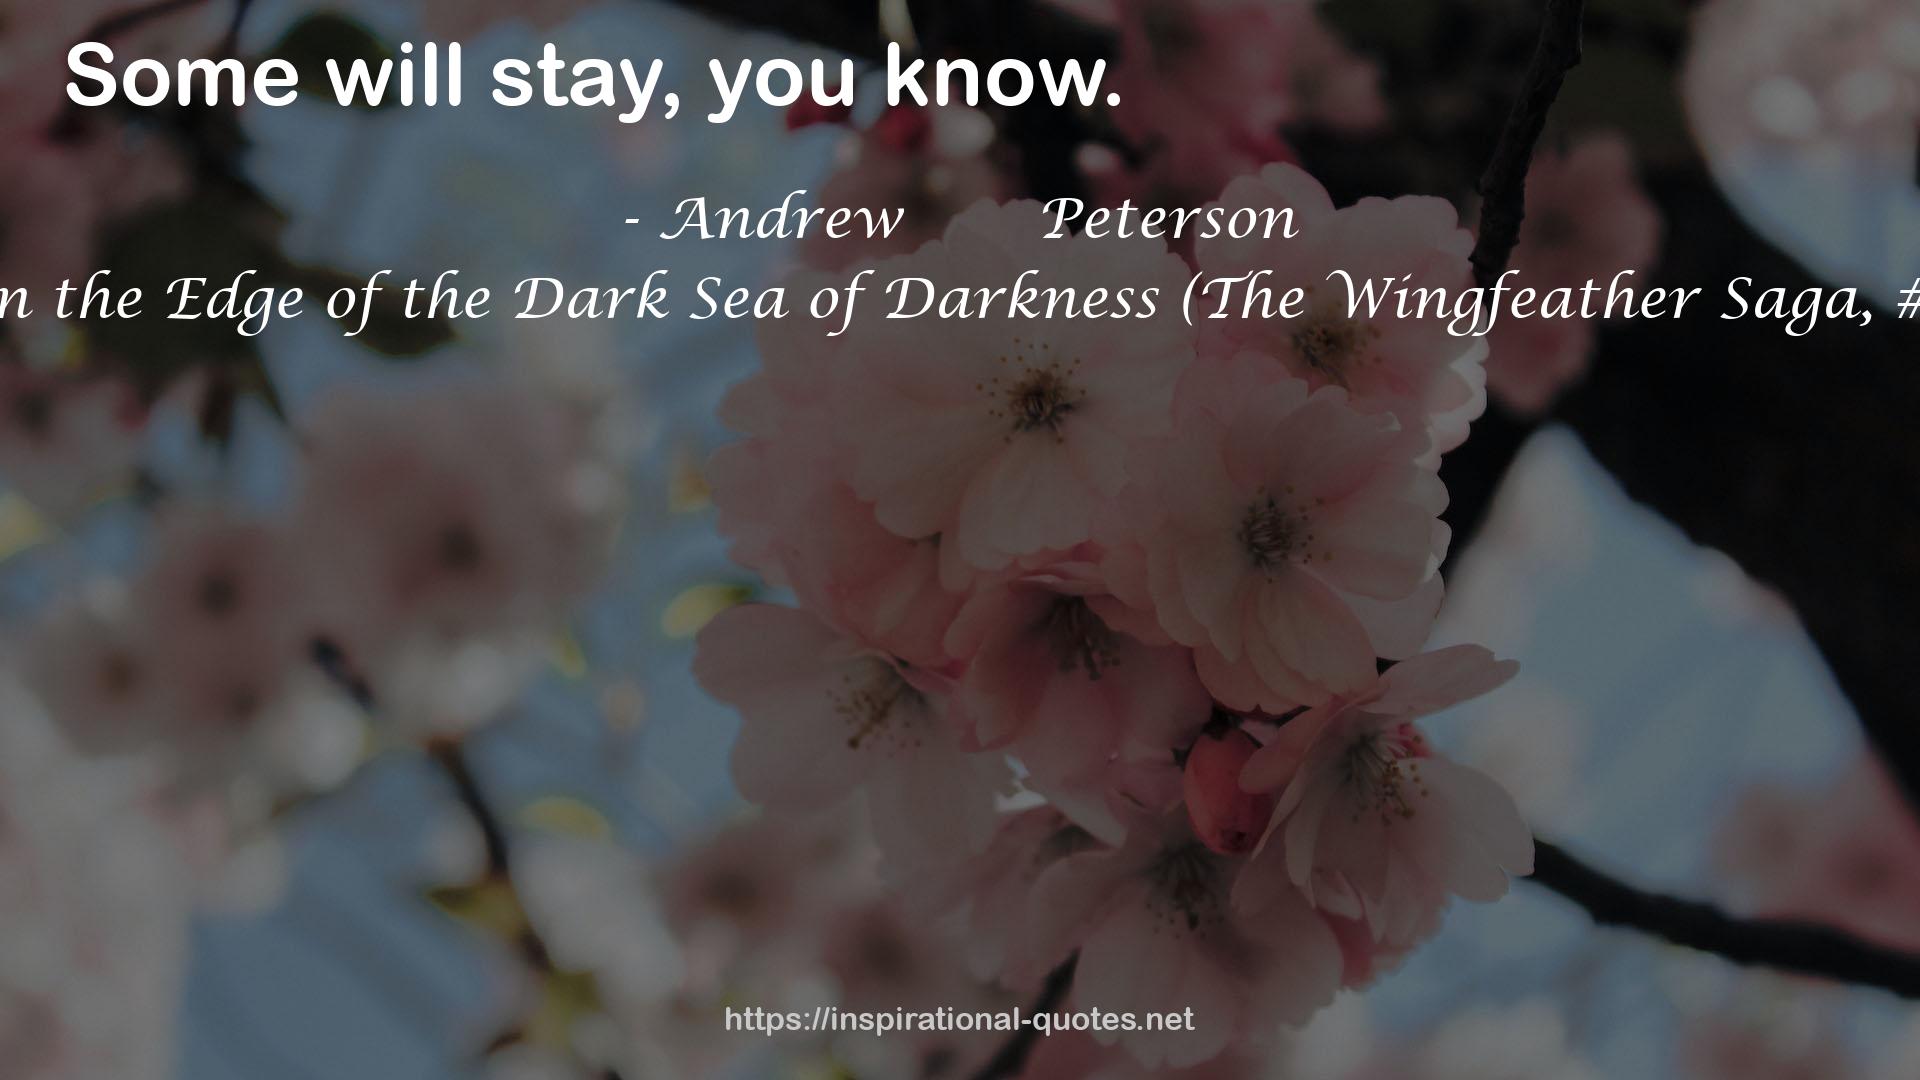 On the Edge of the Dark Sea of Darkness (The Wingfeather Saga, #1) QUOTES